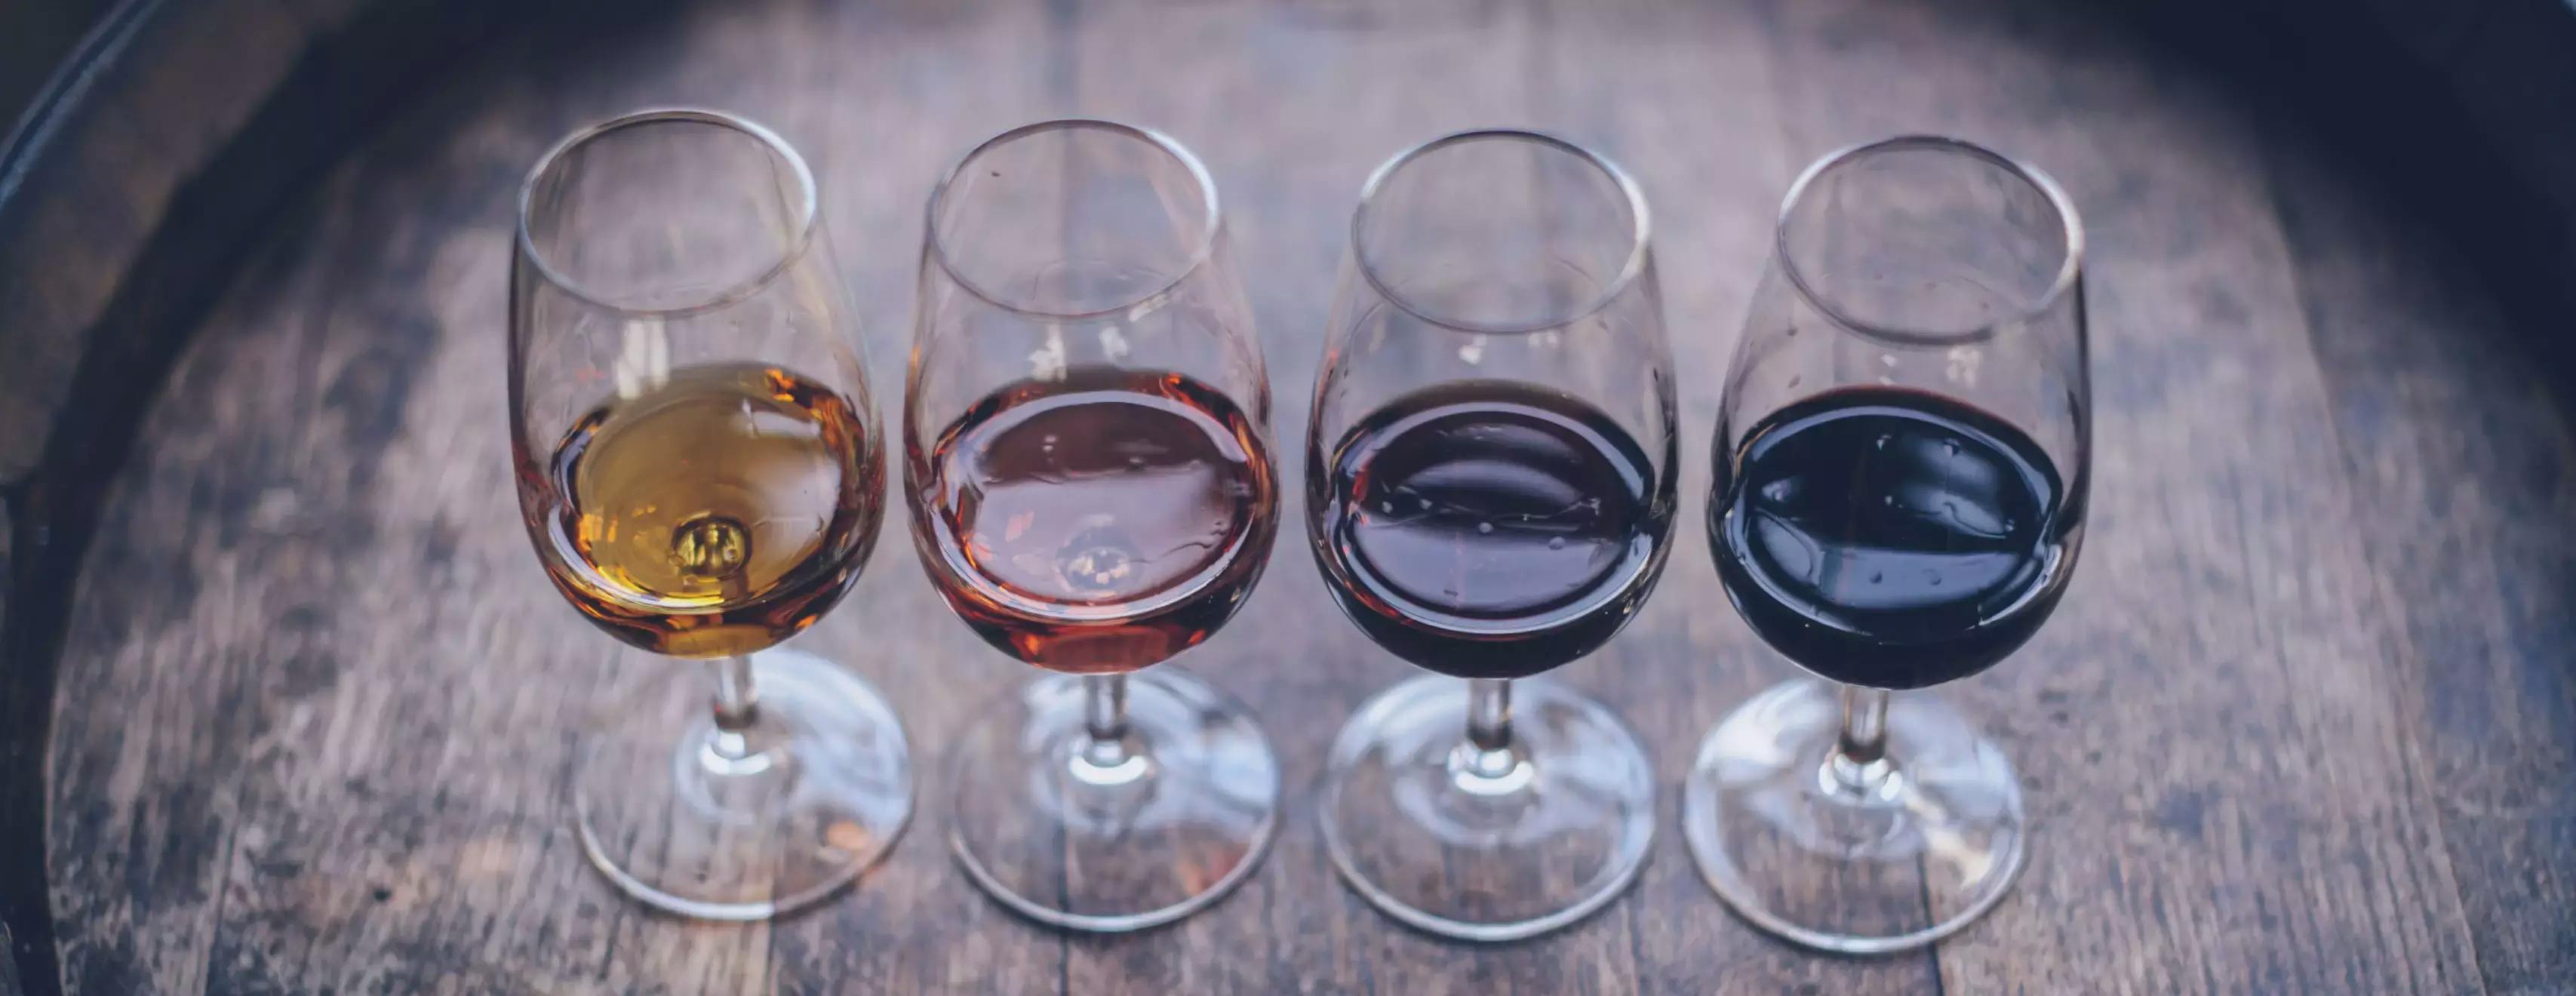 4 glasses of assorted wines on a wooden barrel top